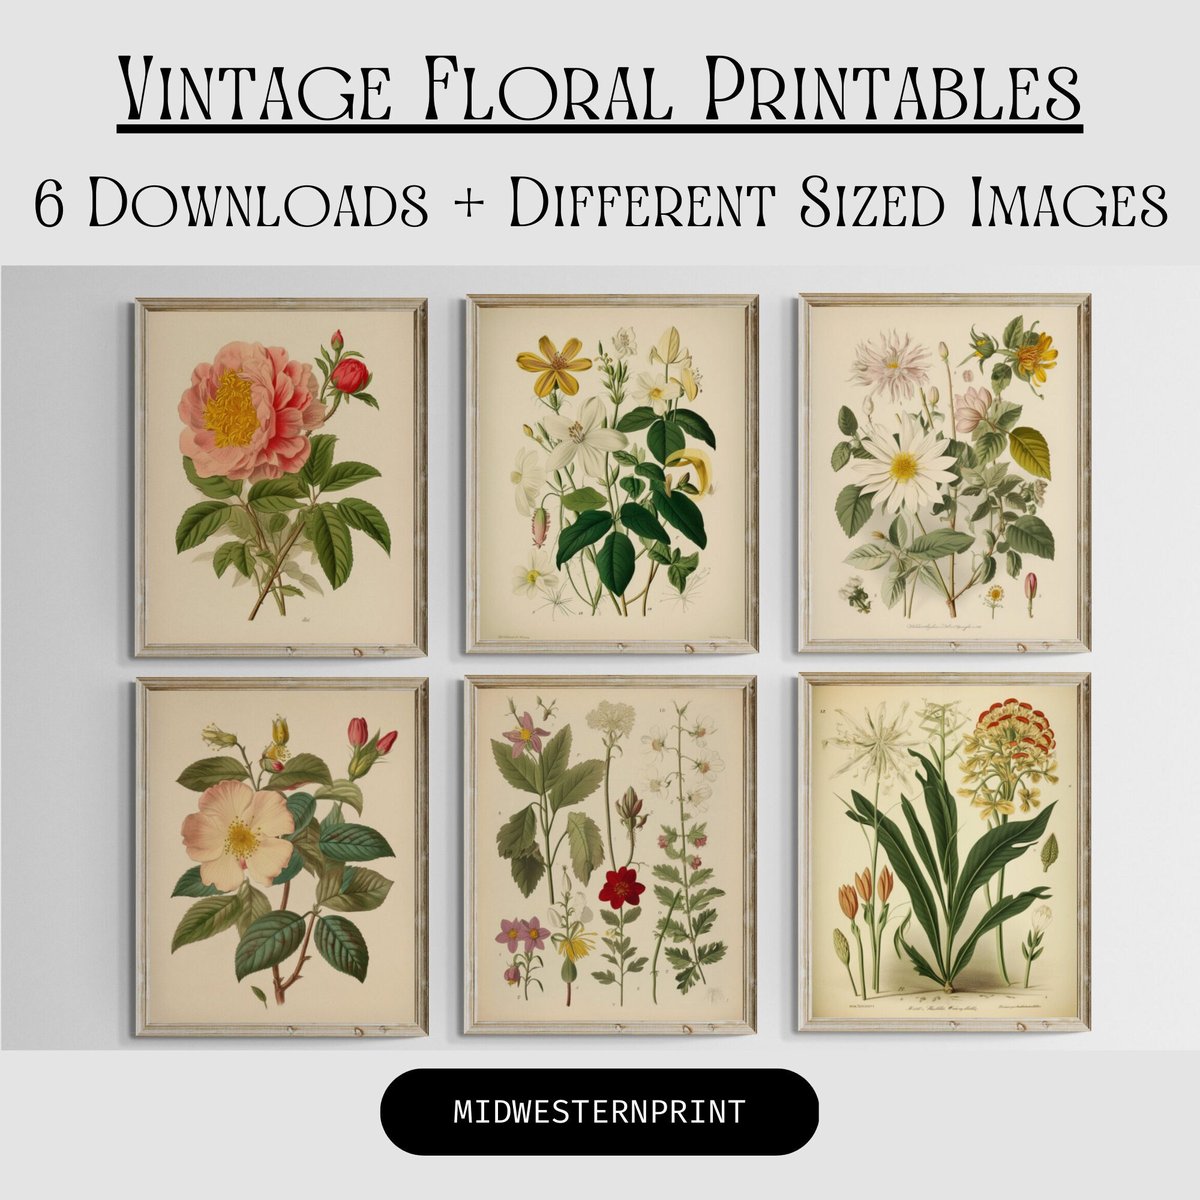 Just in! This unique Vintage Flower Paintings Printable Wall Art Pack (6-Pack) Eclectic | Download | Printable | High Quality for $2.49. 
etsy.com/listing/145171…
#RusticHomeDecor #VintageFlowerArt